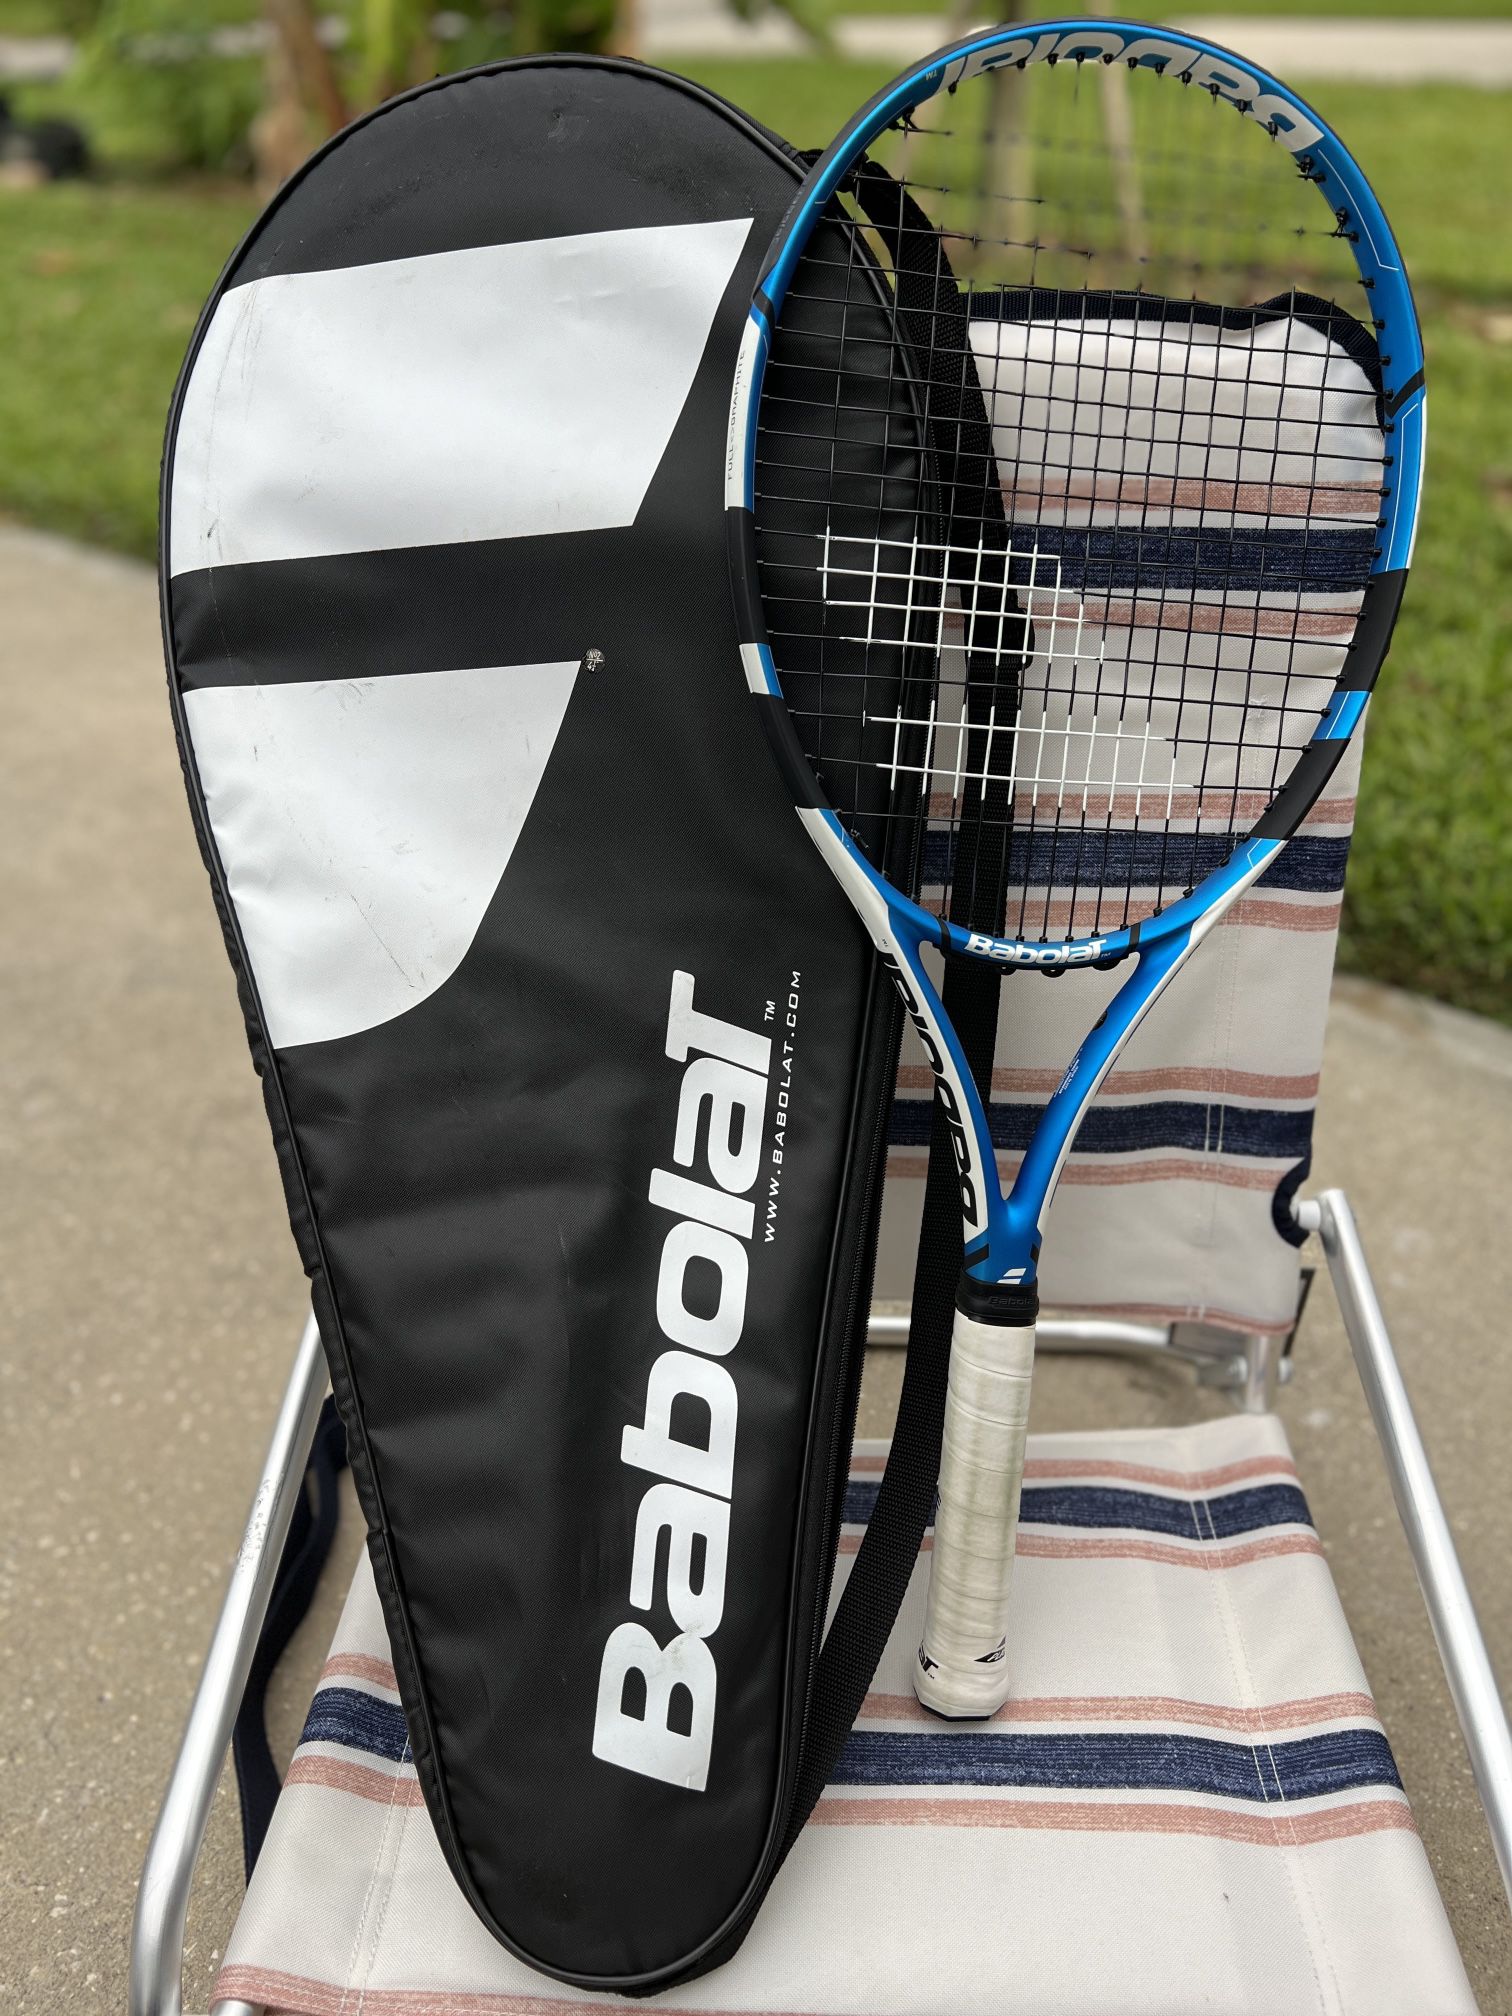 Babolat Boost D Tennis Racket Full Graphite 105 In² Grip Size 4¼ Number 2 w Bag